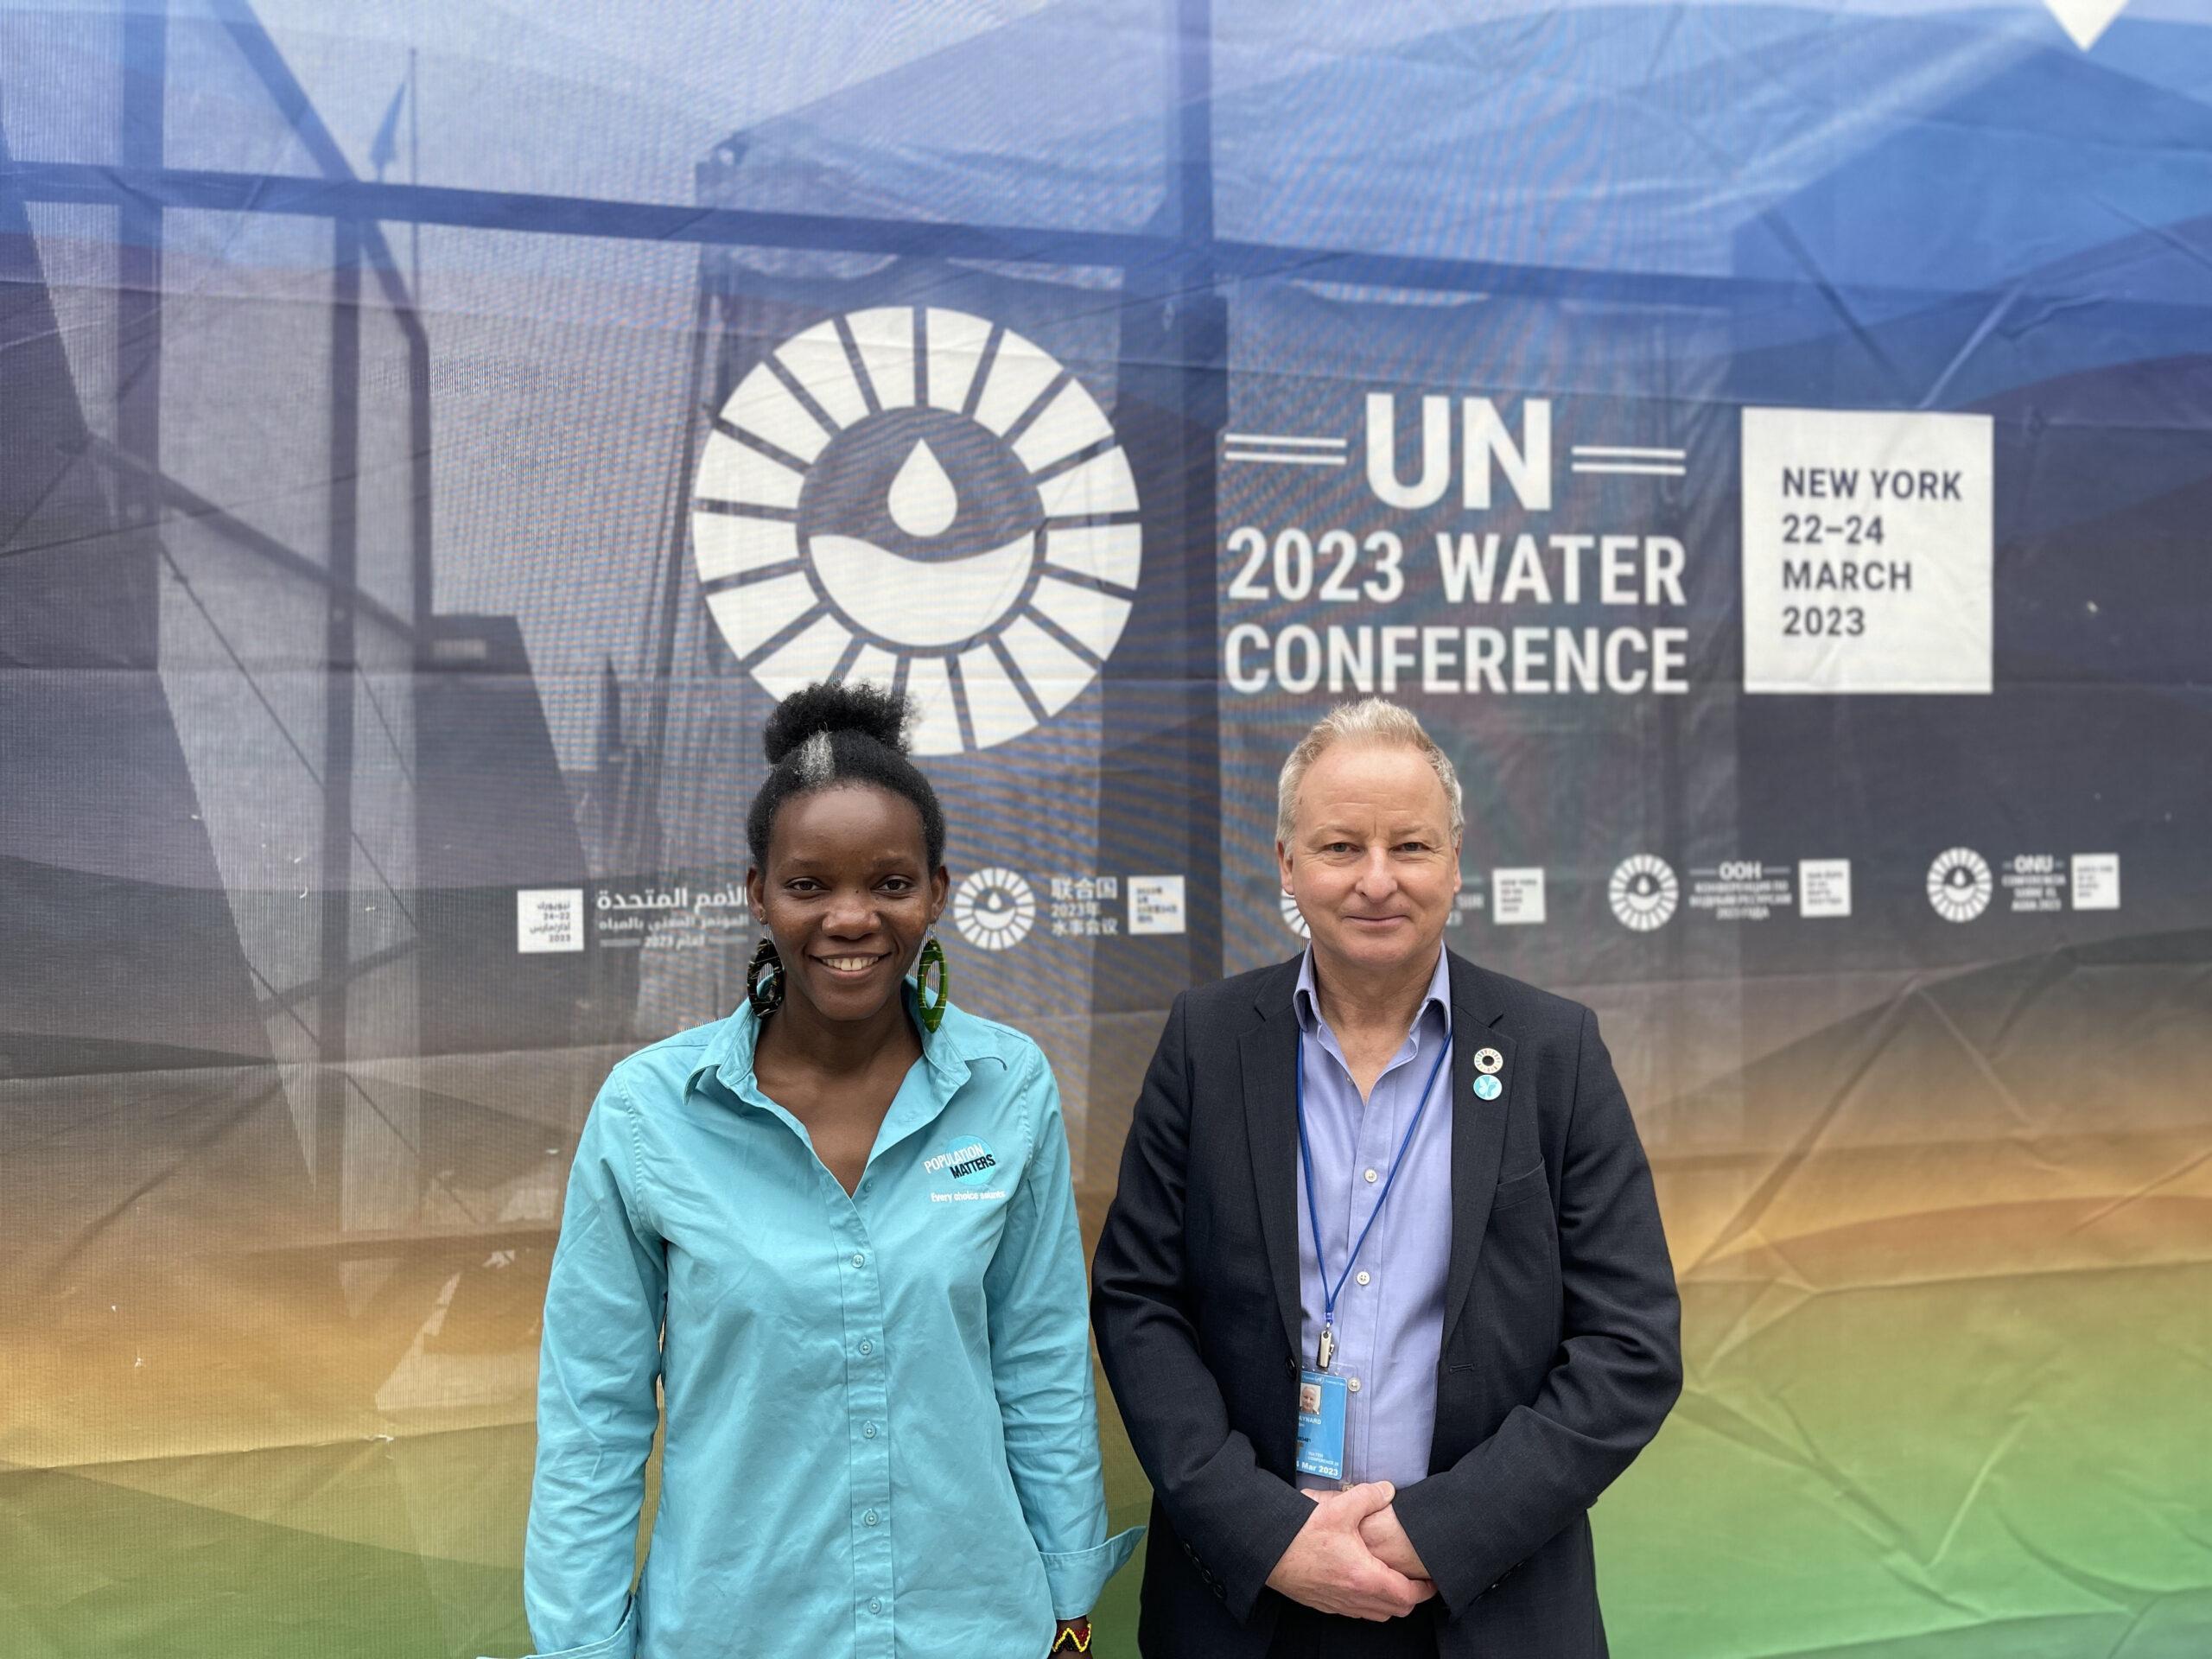 Talking population at the UN Water Conference